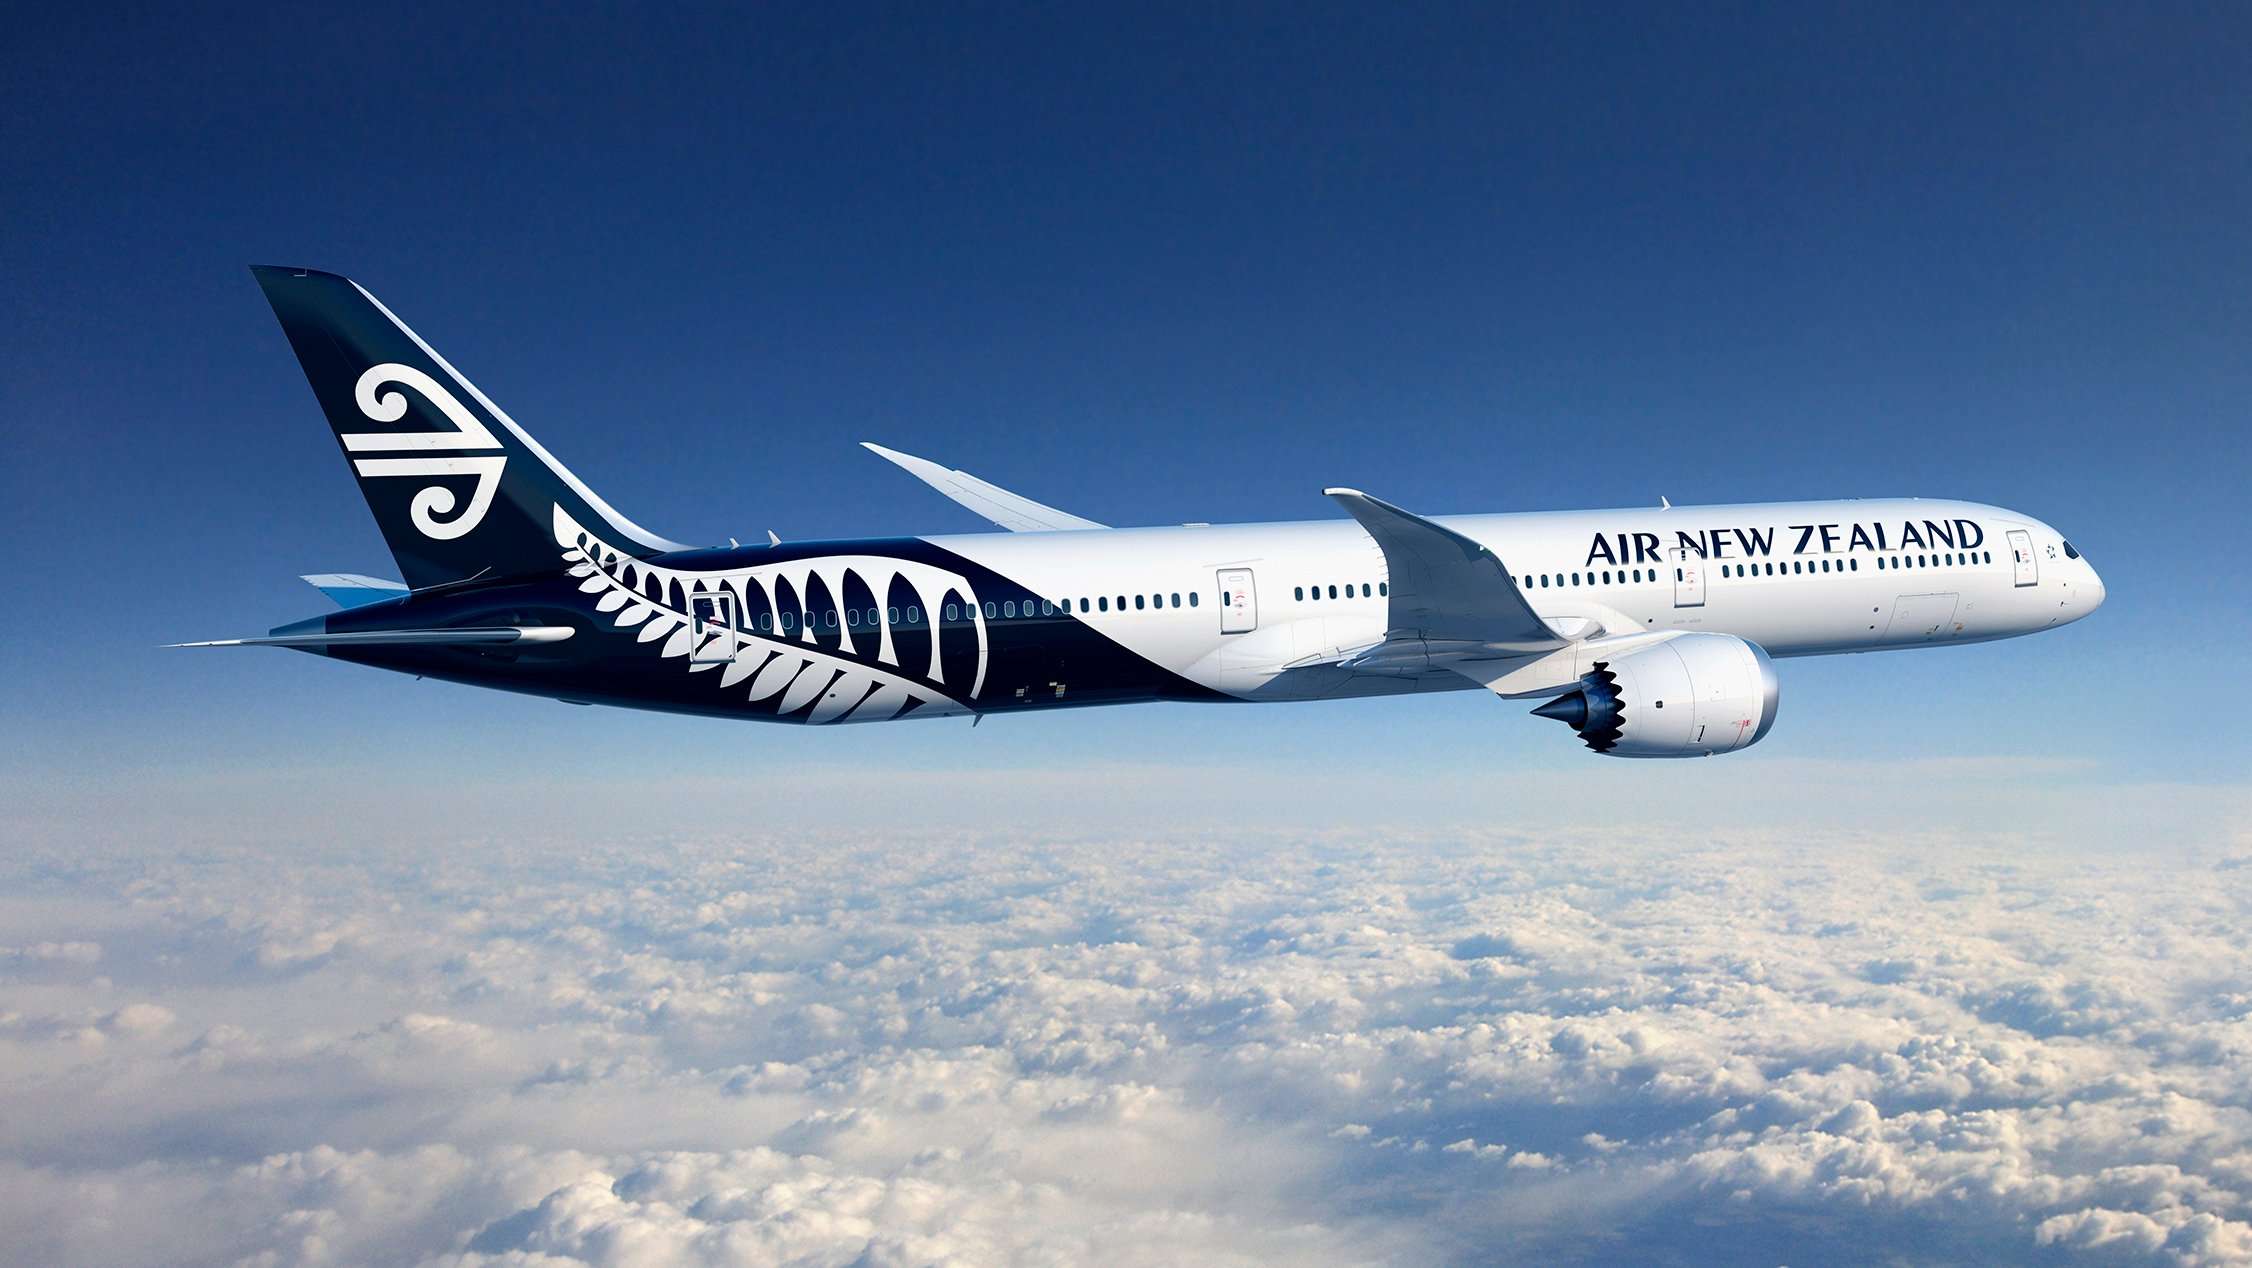 Image of a flying Air New Zealand Boeing 787